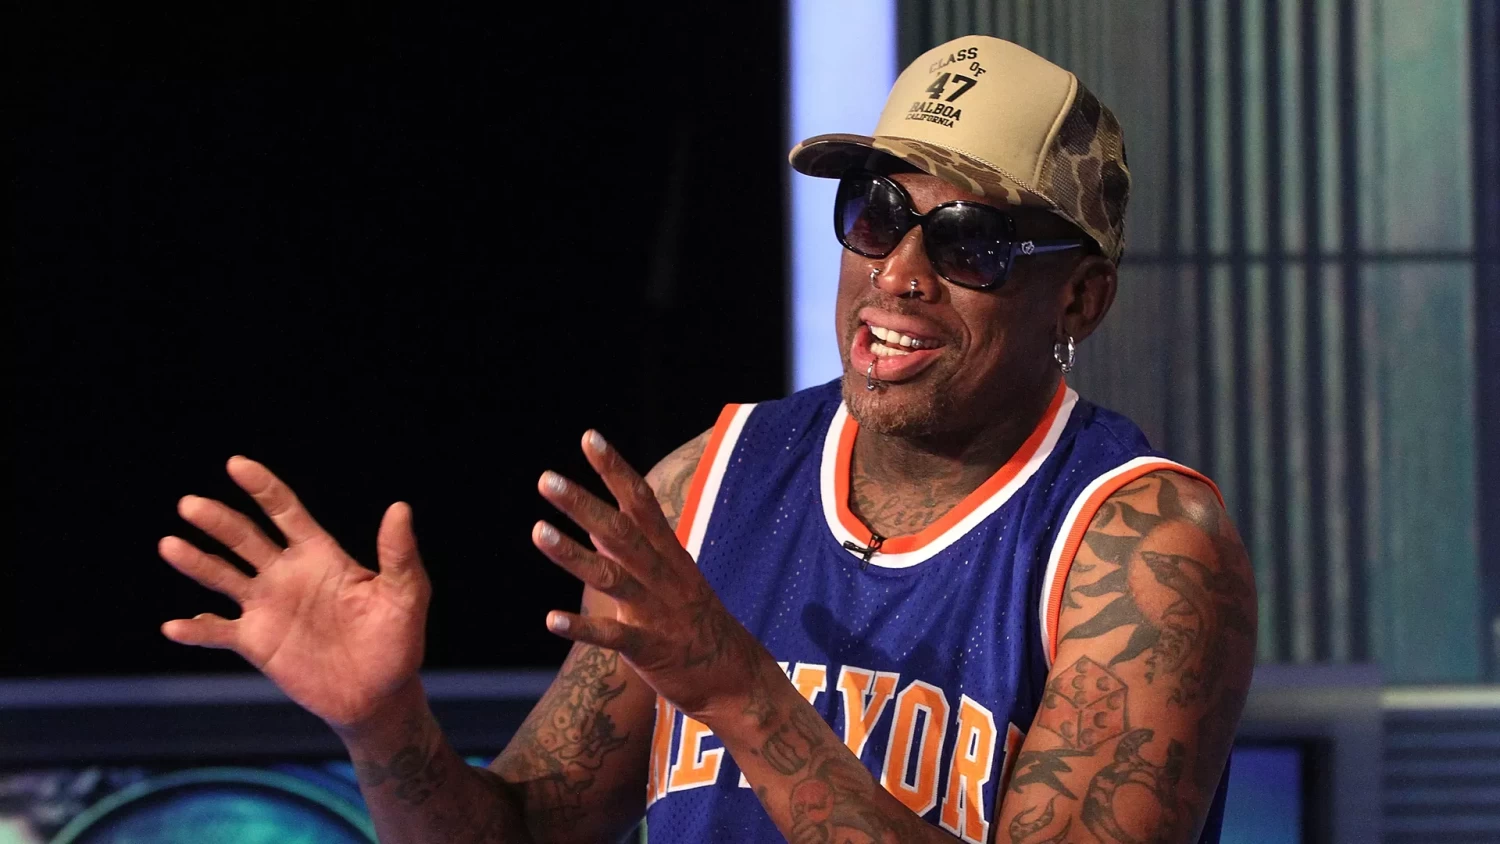 Dennis Rodman says he's going to Russia to seek Brittney Griner's release